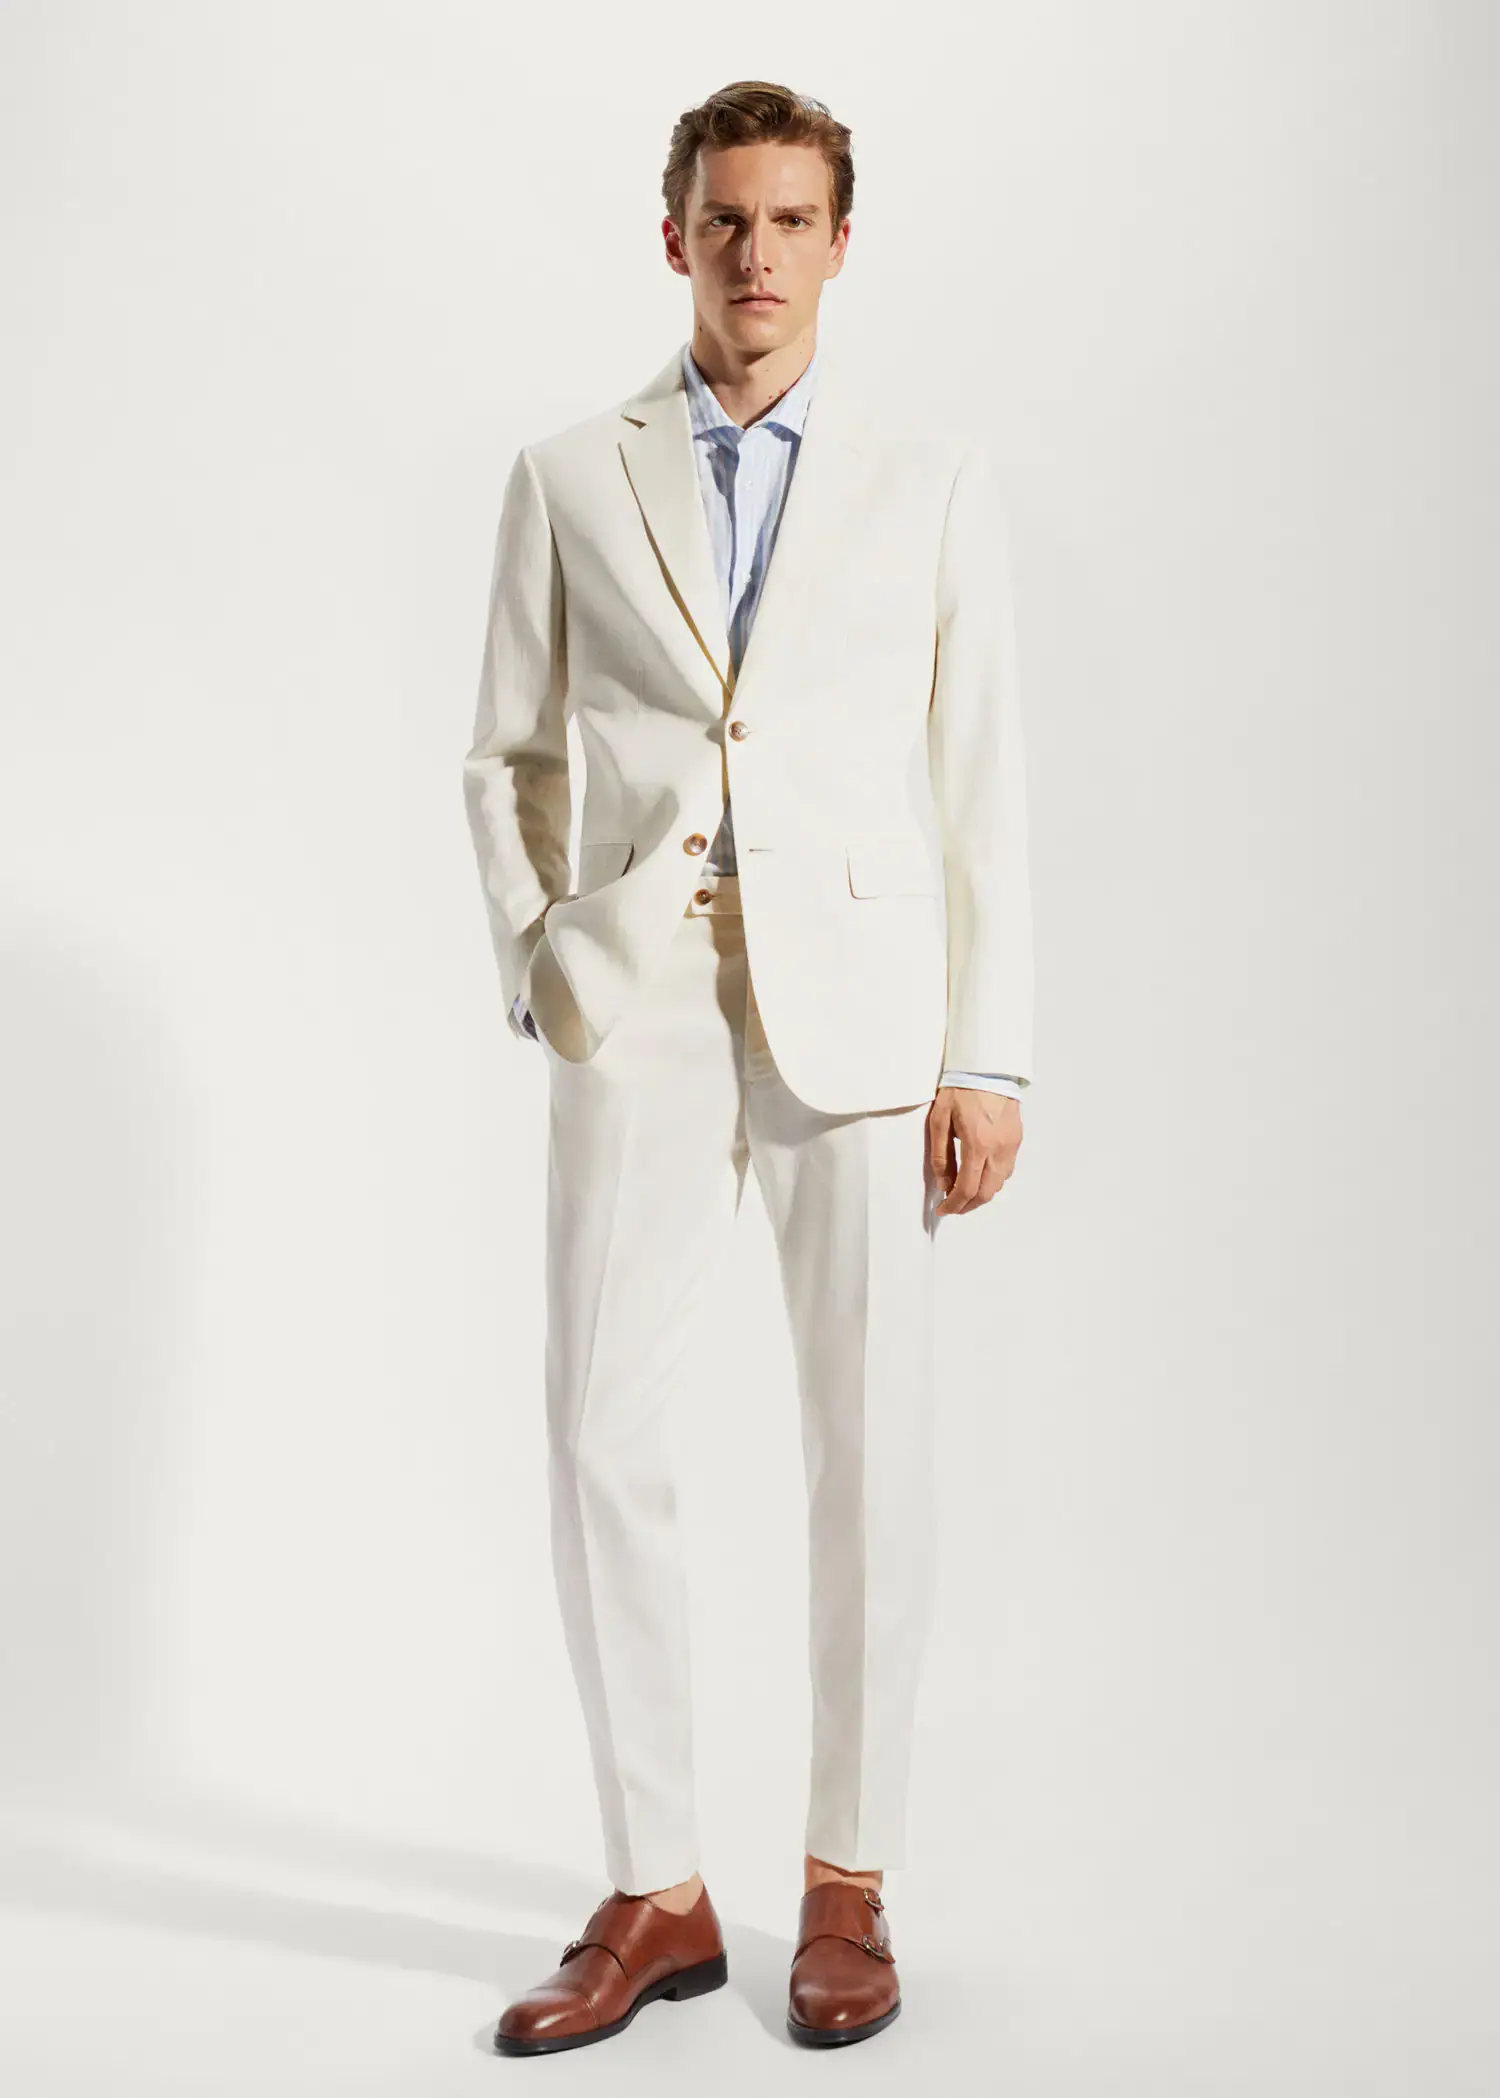 Mango 100% linen suit trousers. a man in a white suit standing in front of a white wall. 